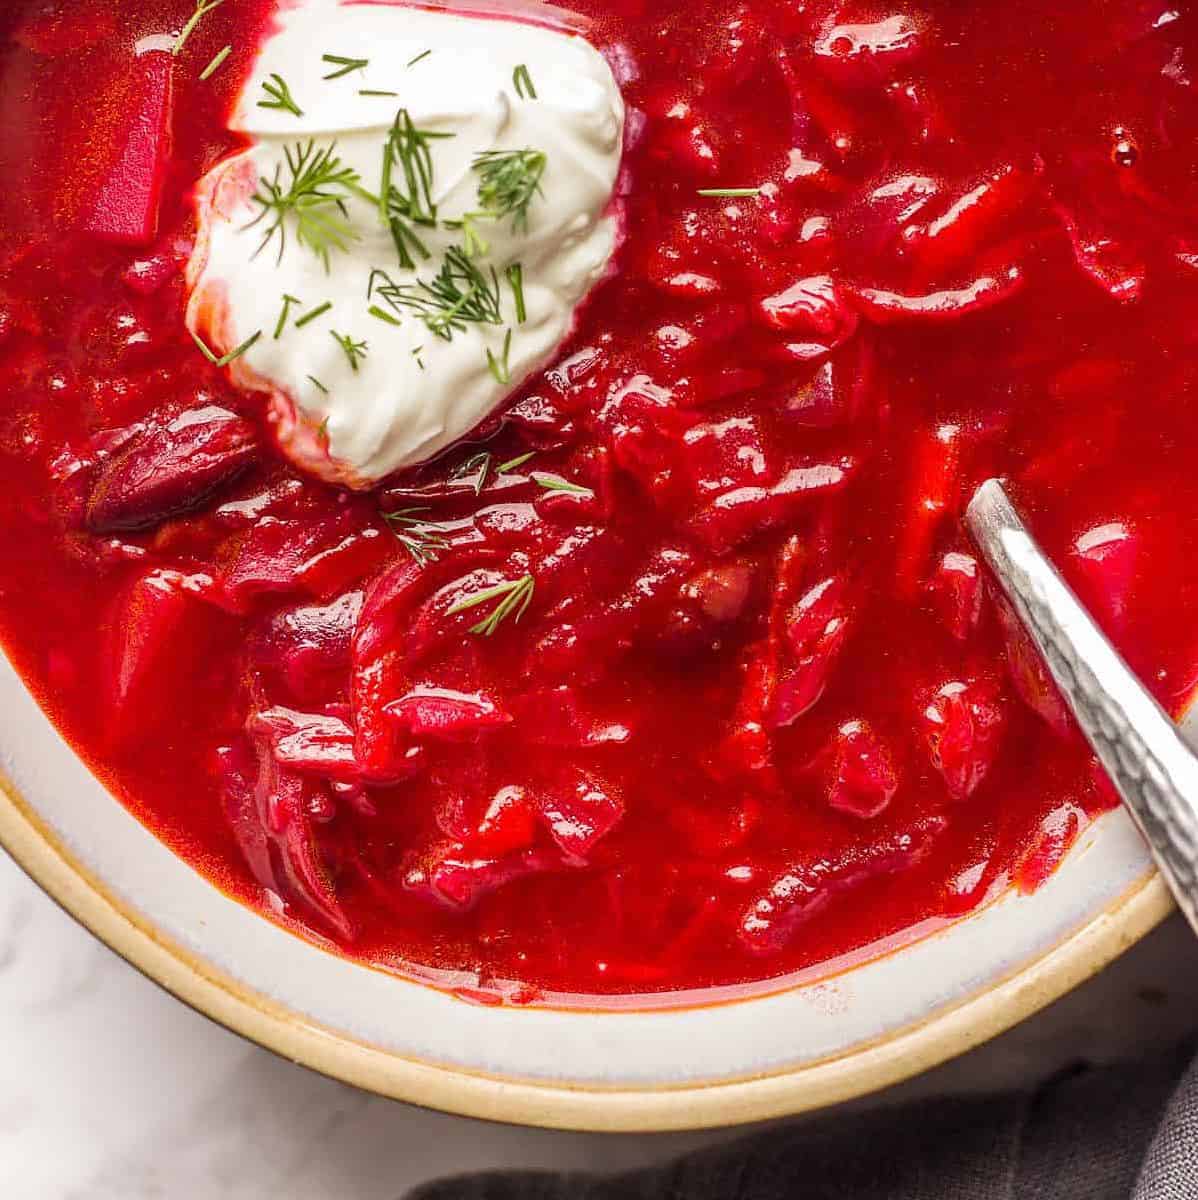  You'll be surprised how easy it is to make your own borscht at home.